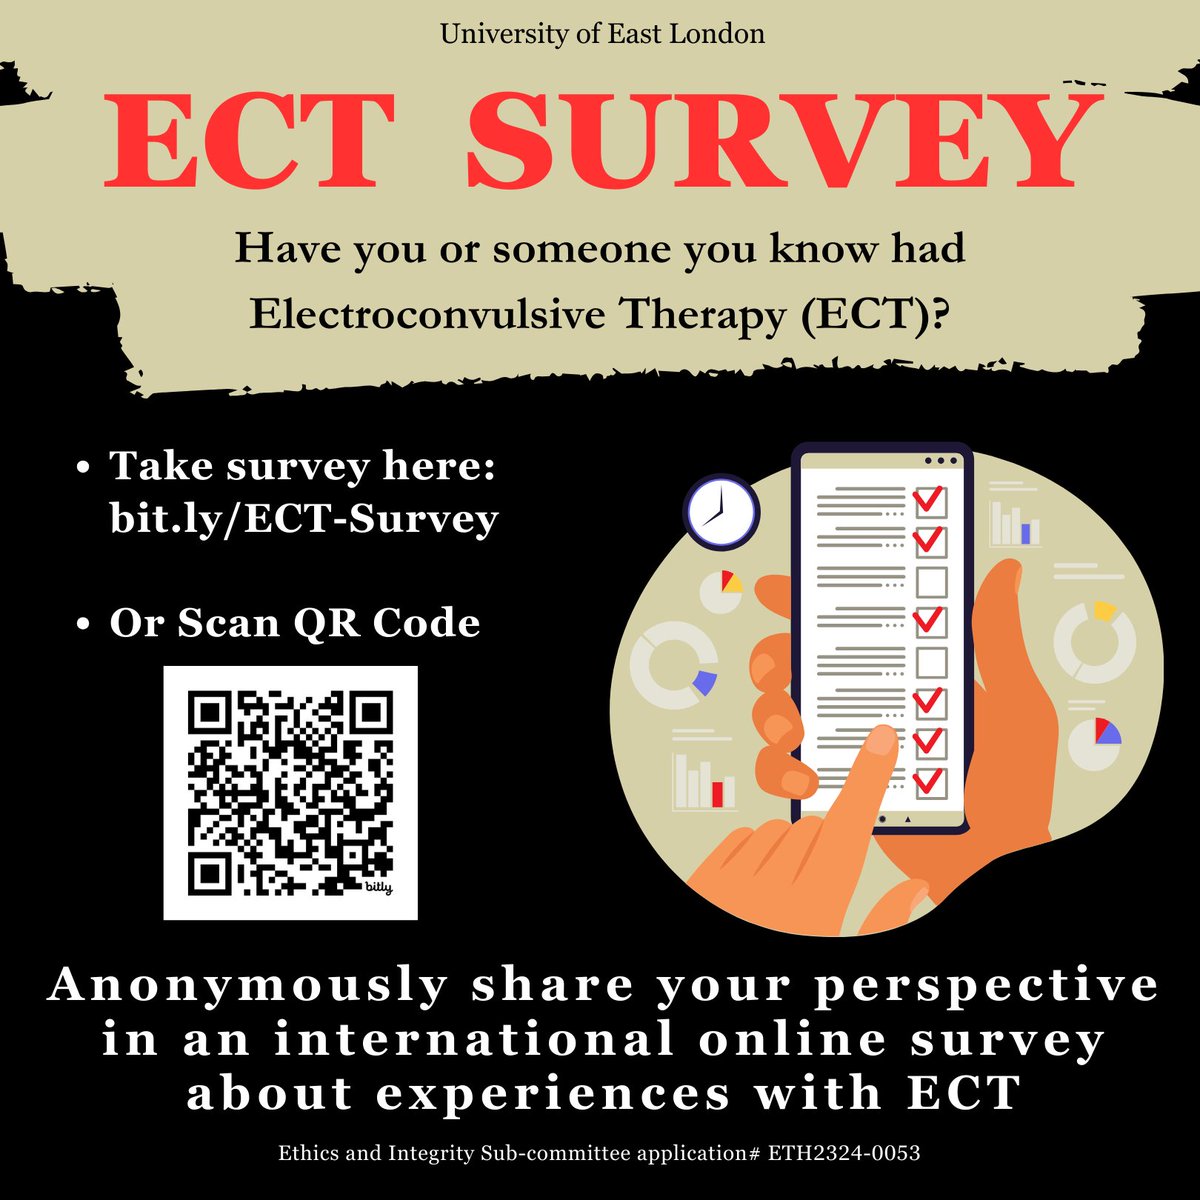 Speaking of #MentalHealthMatters, have you, or someone you love had electroconvulsive therapy #ECT? Share your experience (good/bad/mixed) anonymously in our int'l survey! uelpsych.eu.qualtrics.com/jfe/form/SV_57… @BethFratesMD @Mental_Elf @JodiAman @natasha_tracy @PJK4brainhealth @kwelkernbc